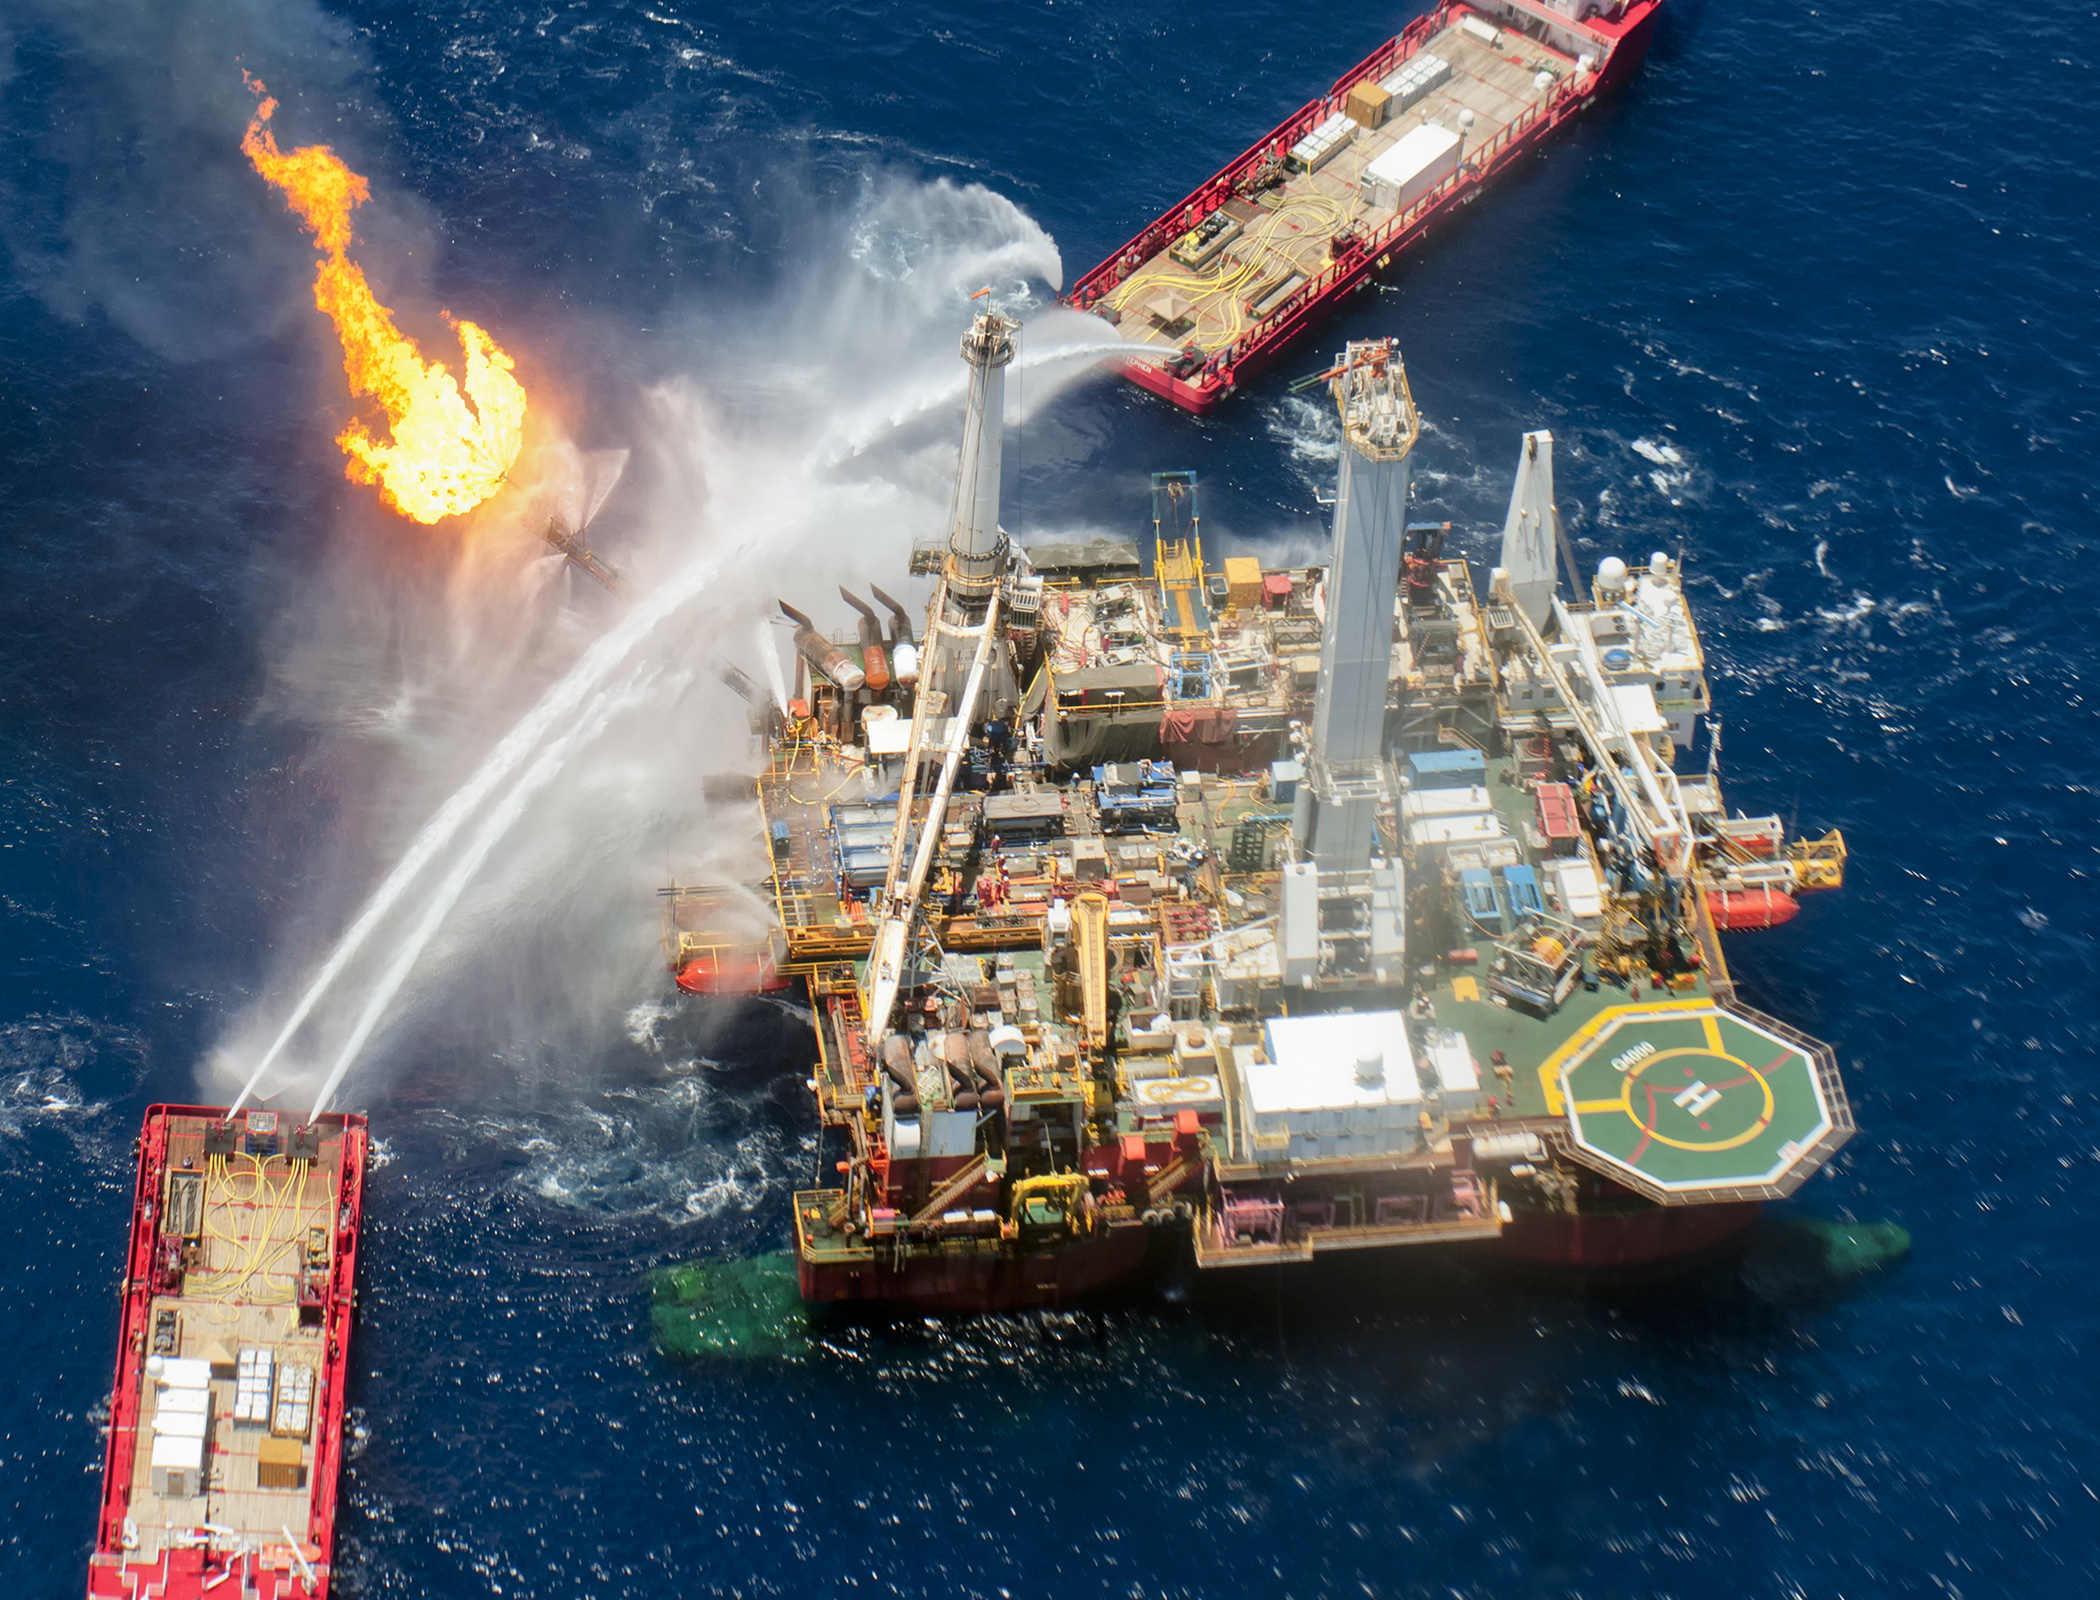 Pollutants from Deepwater Horizon oil spill detectable 10 years on